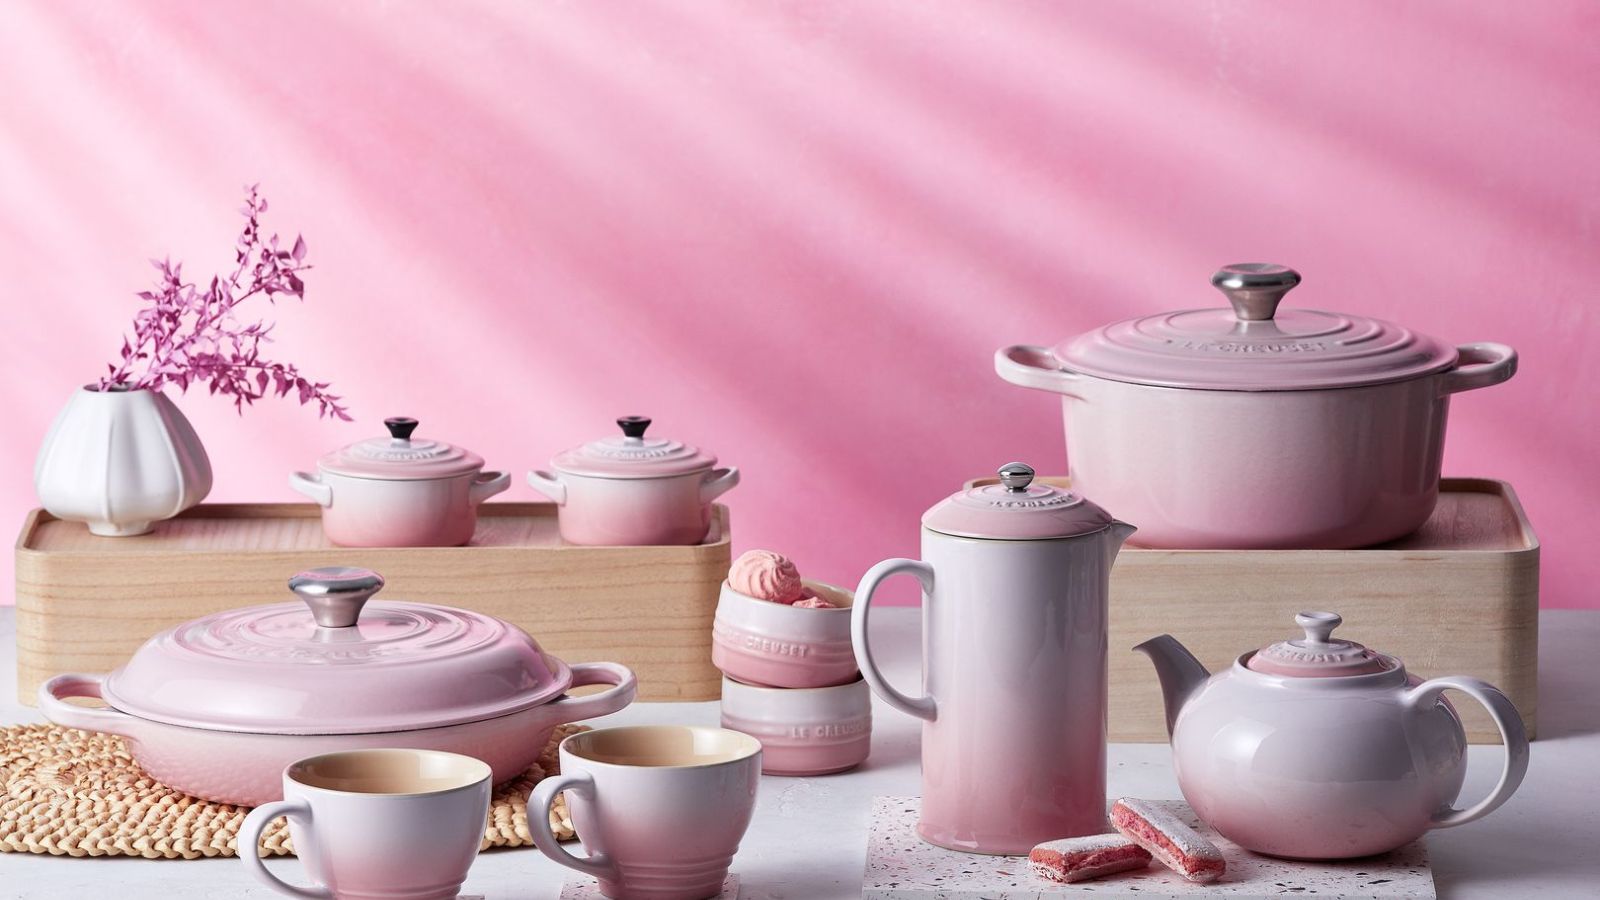 Costco Is Selling a 157-Piece Le Creuset Set for $4,500: Photos